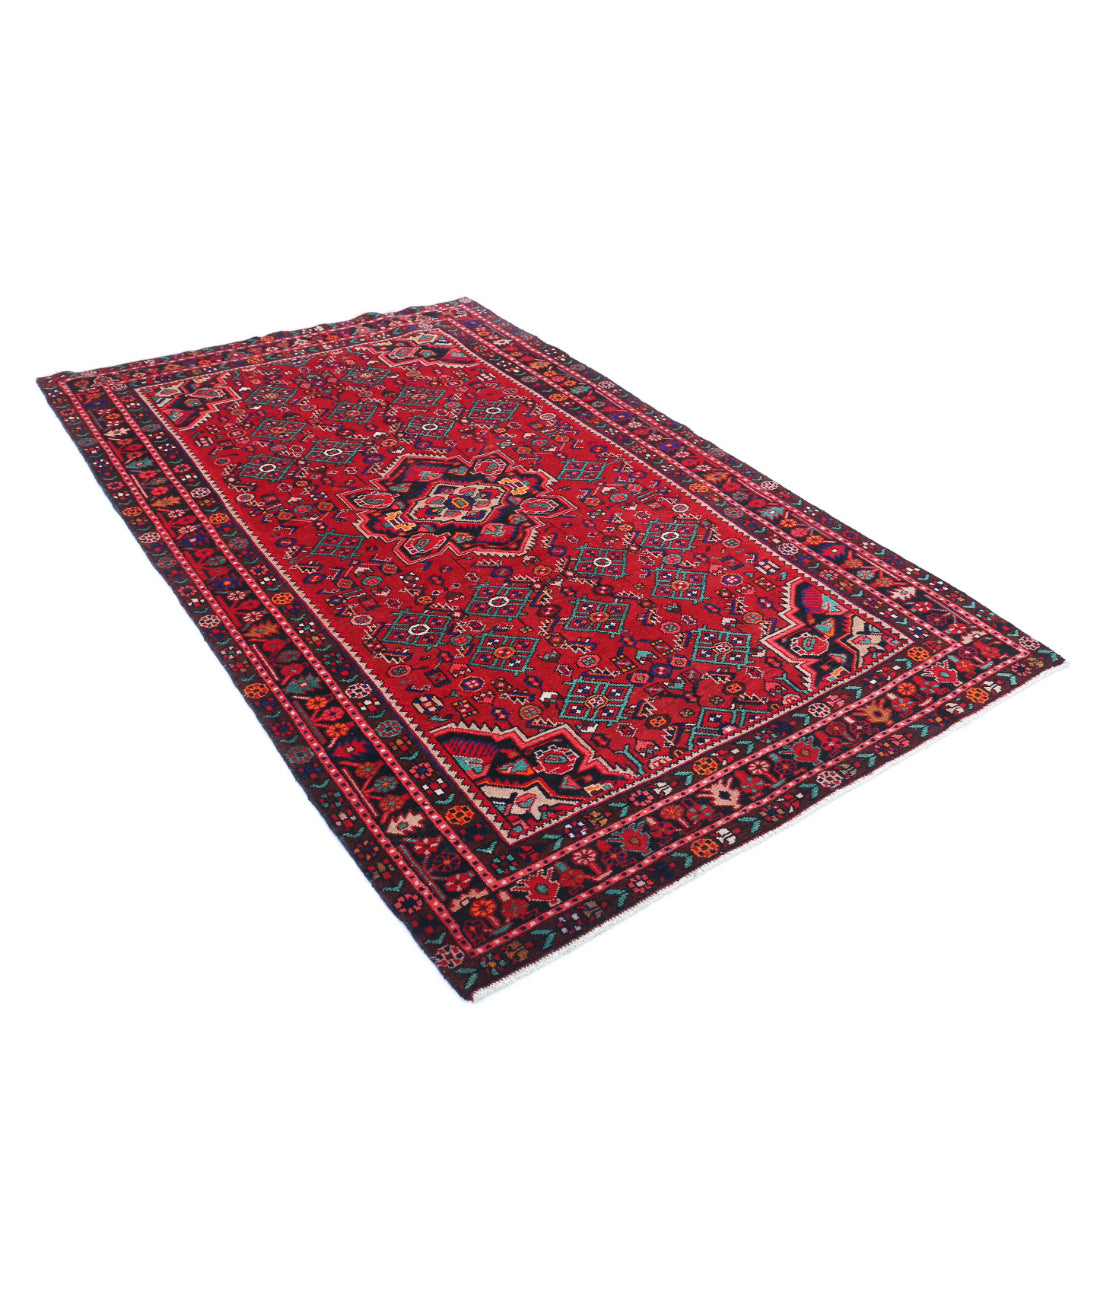 Hand Knotted Persian Hamadan Wool Rug - 5'4'' x 7'11'' 5'4'' x 7'11'' (160 X 238) / Red / Black